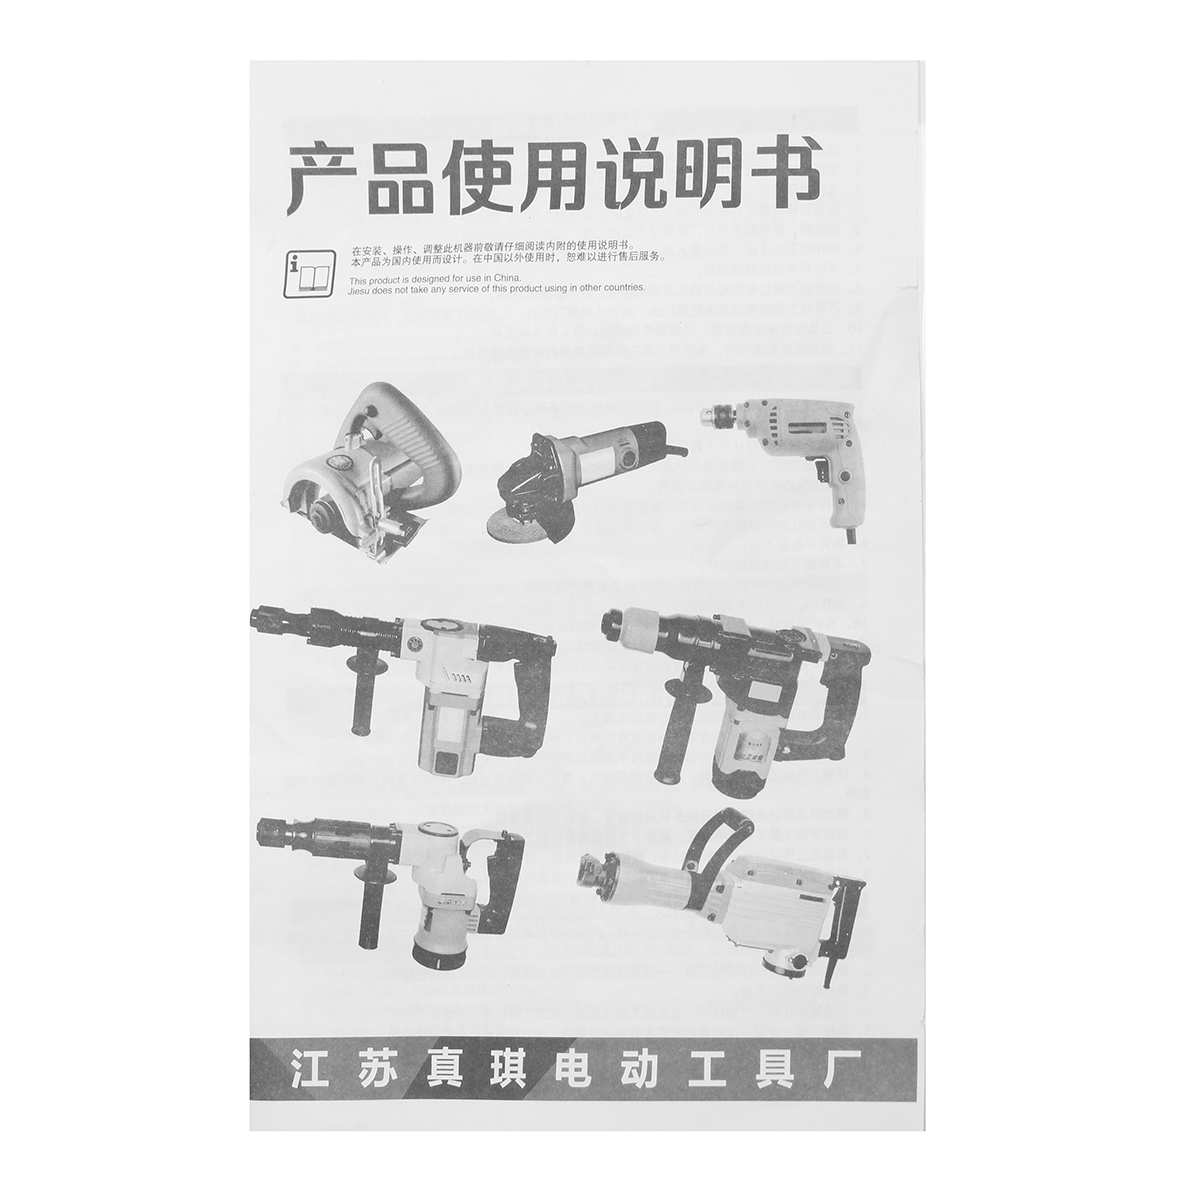 Electric-Wrench-98V-Lithium-Ion-Cordless-Impact-Wrench-Brushless-Motor-Power-Wrench-Tools-1310565-8